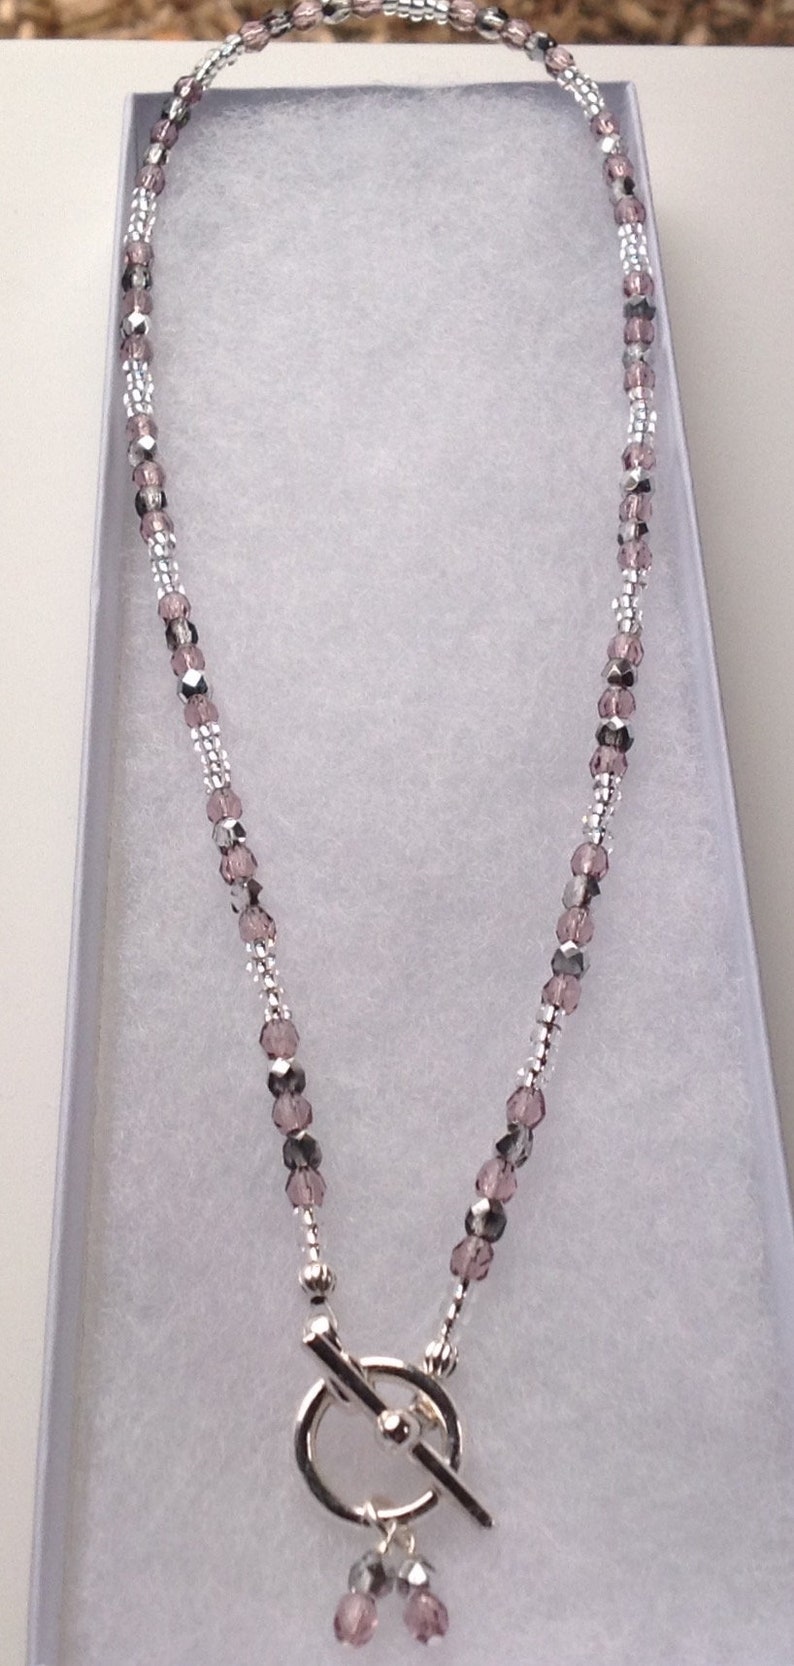 Dusky pink and silver Preciosa crystal toggle clasp necklace. With black card gift box. image 1